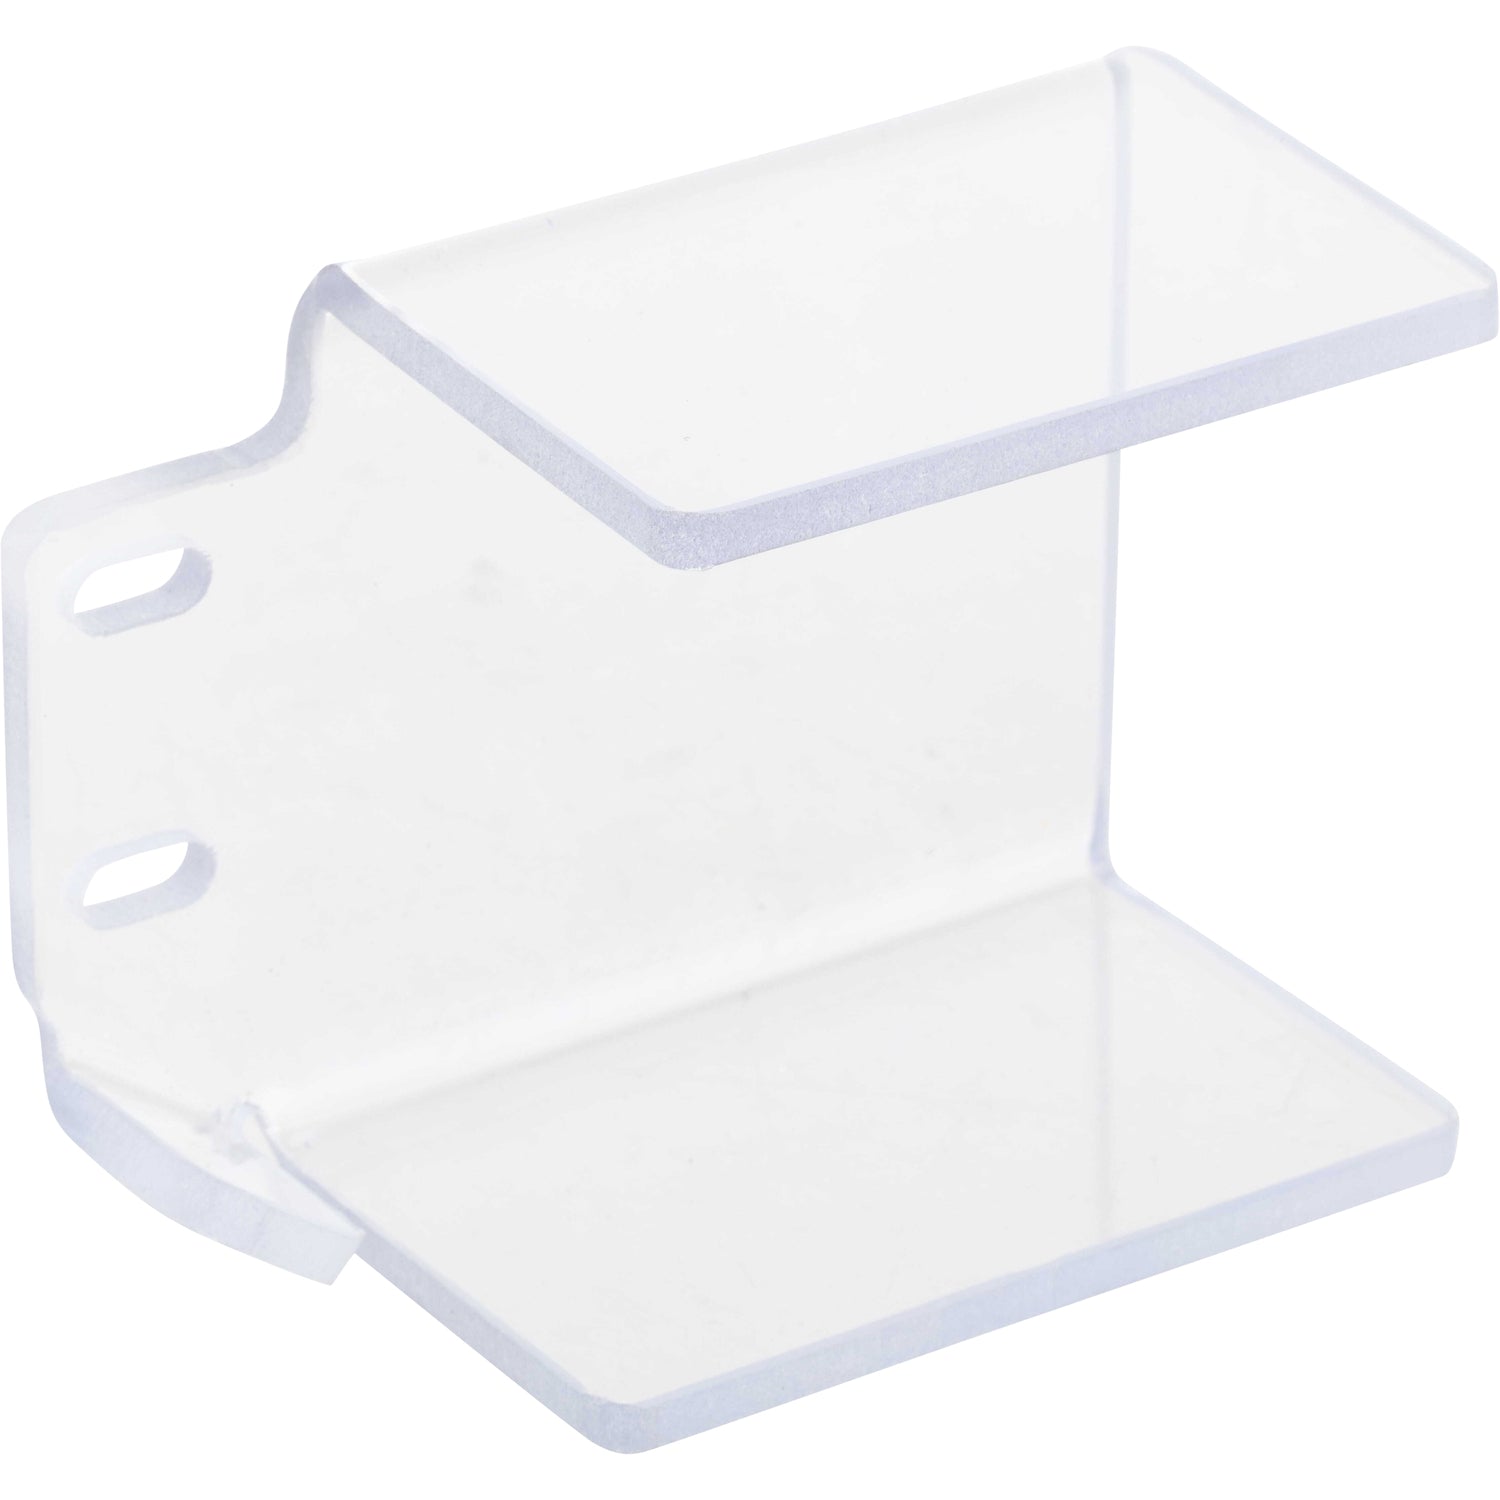 Clear bent polycarbonate guarding shown on a white background.